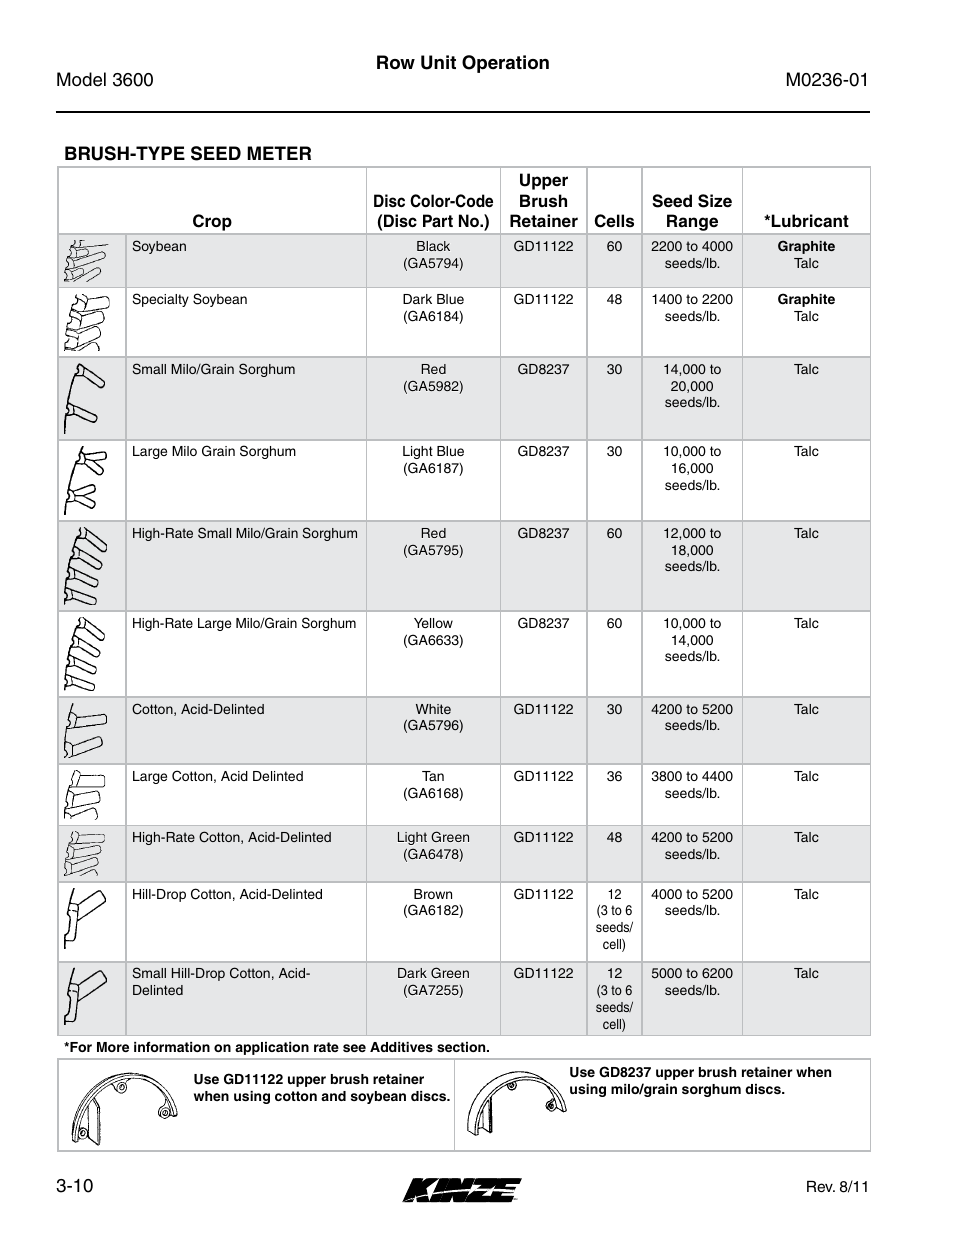 Brush-type seed meter, Brush-type seed meter -10, Row unit operation | Kinze 3600 Lift and Rotate Planter Rev. 7/14 User Manual | Page 54 / 172